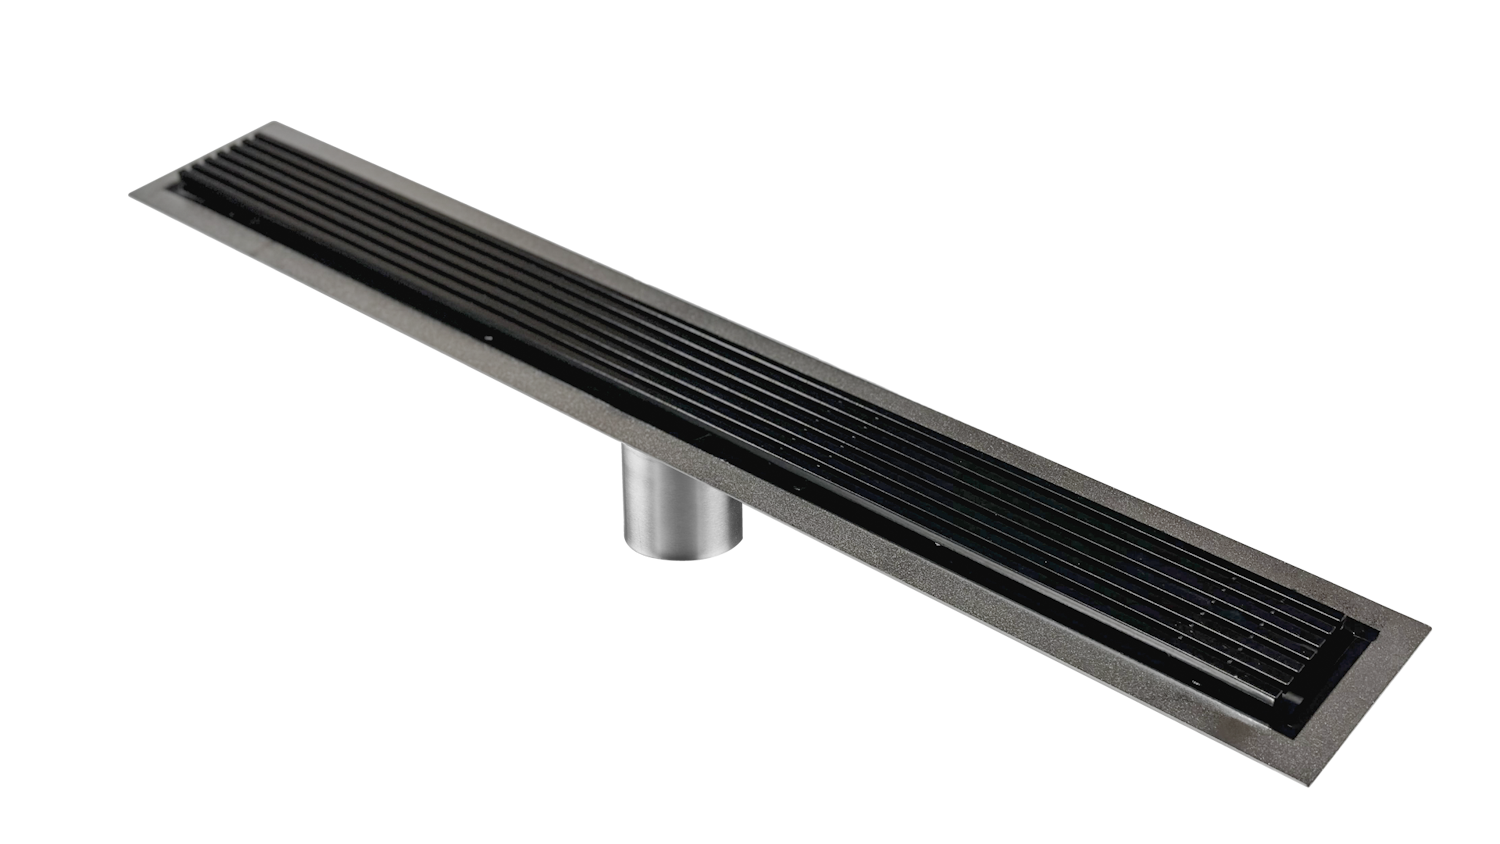 39 Inch Black Linear Shower Drain Wedge Wire Design, Drains Unlimited